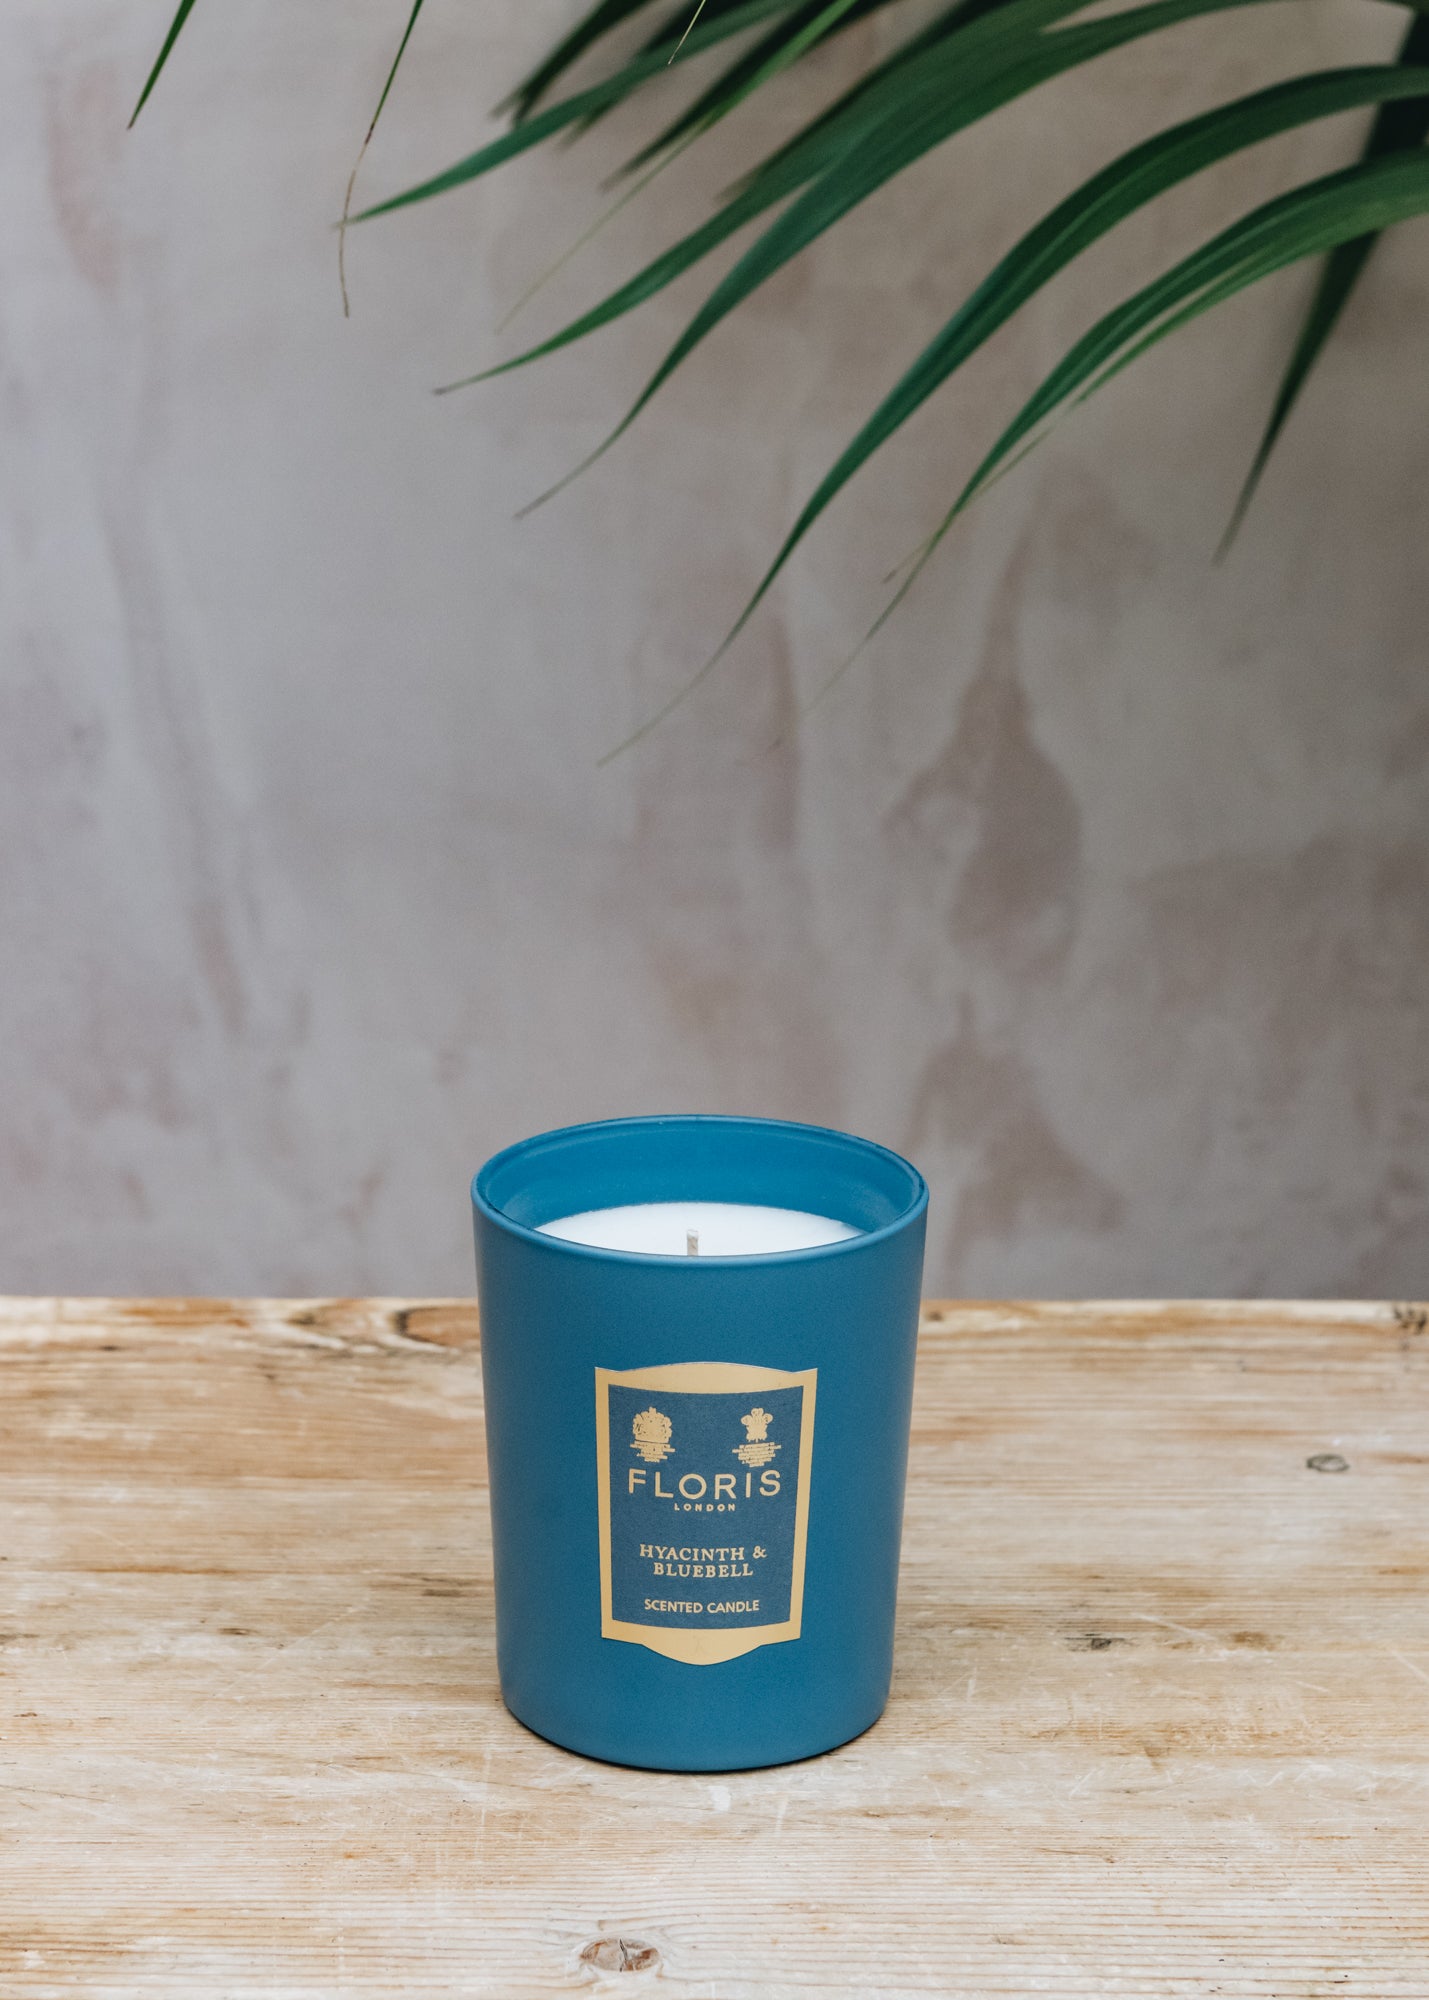 Floris Candle in Hyacinth and Bluebell